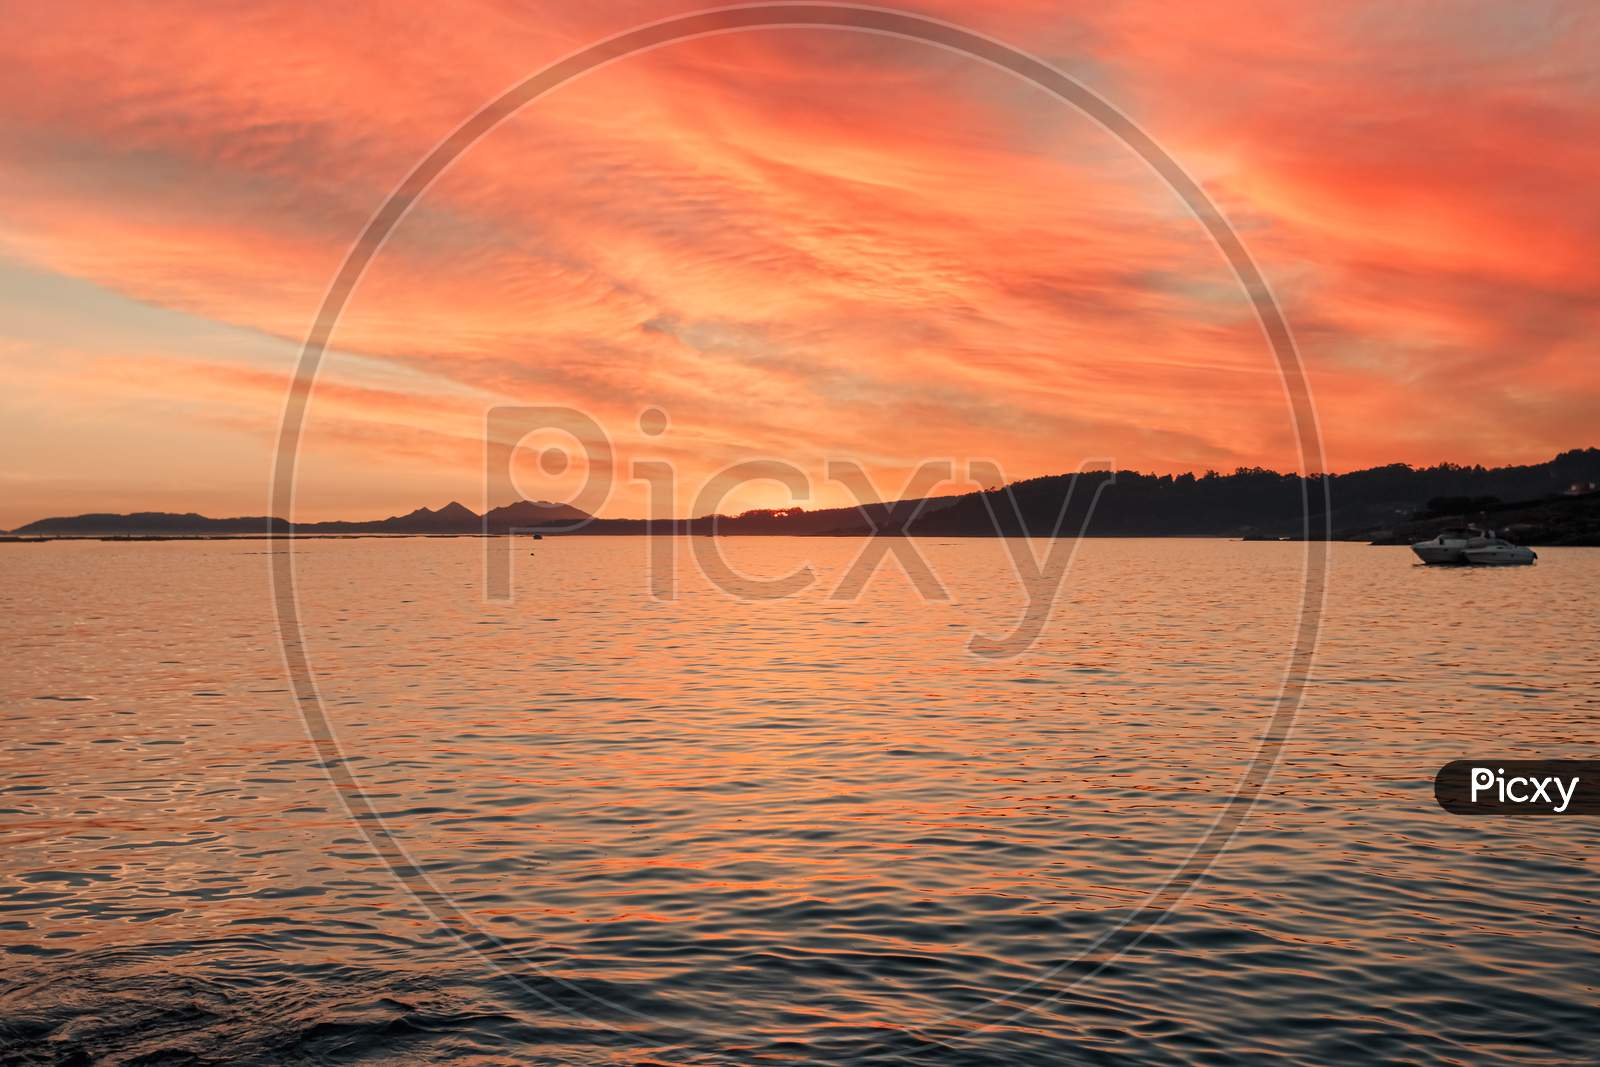 Horizon Of Some Islands Under A Colorful Sunset With A Relaxing Seascape